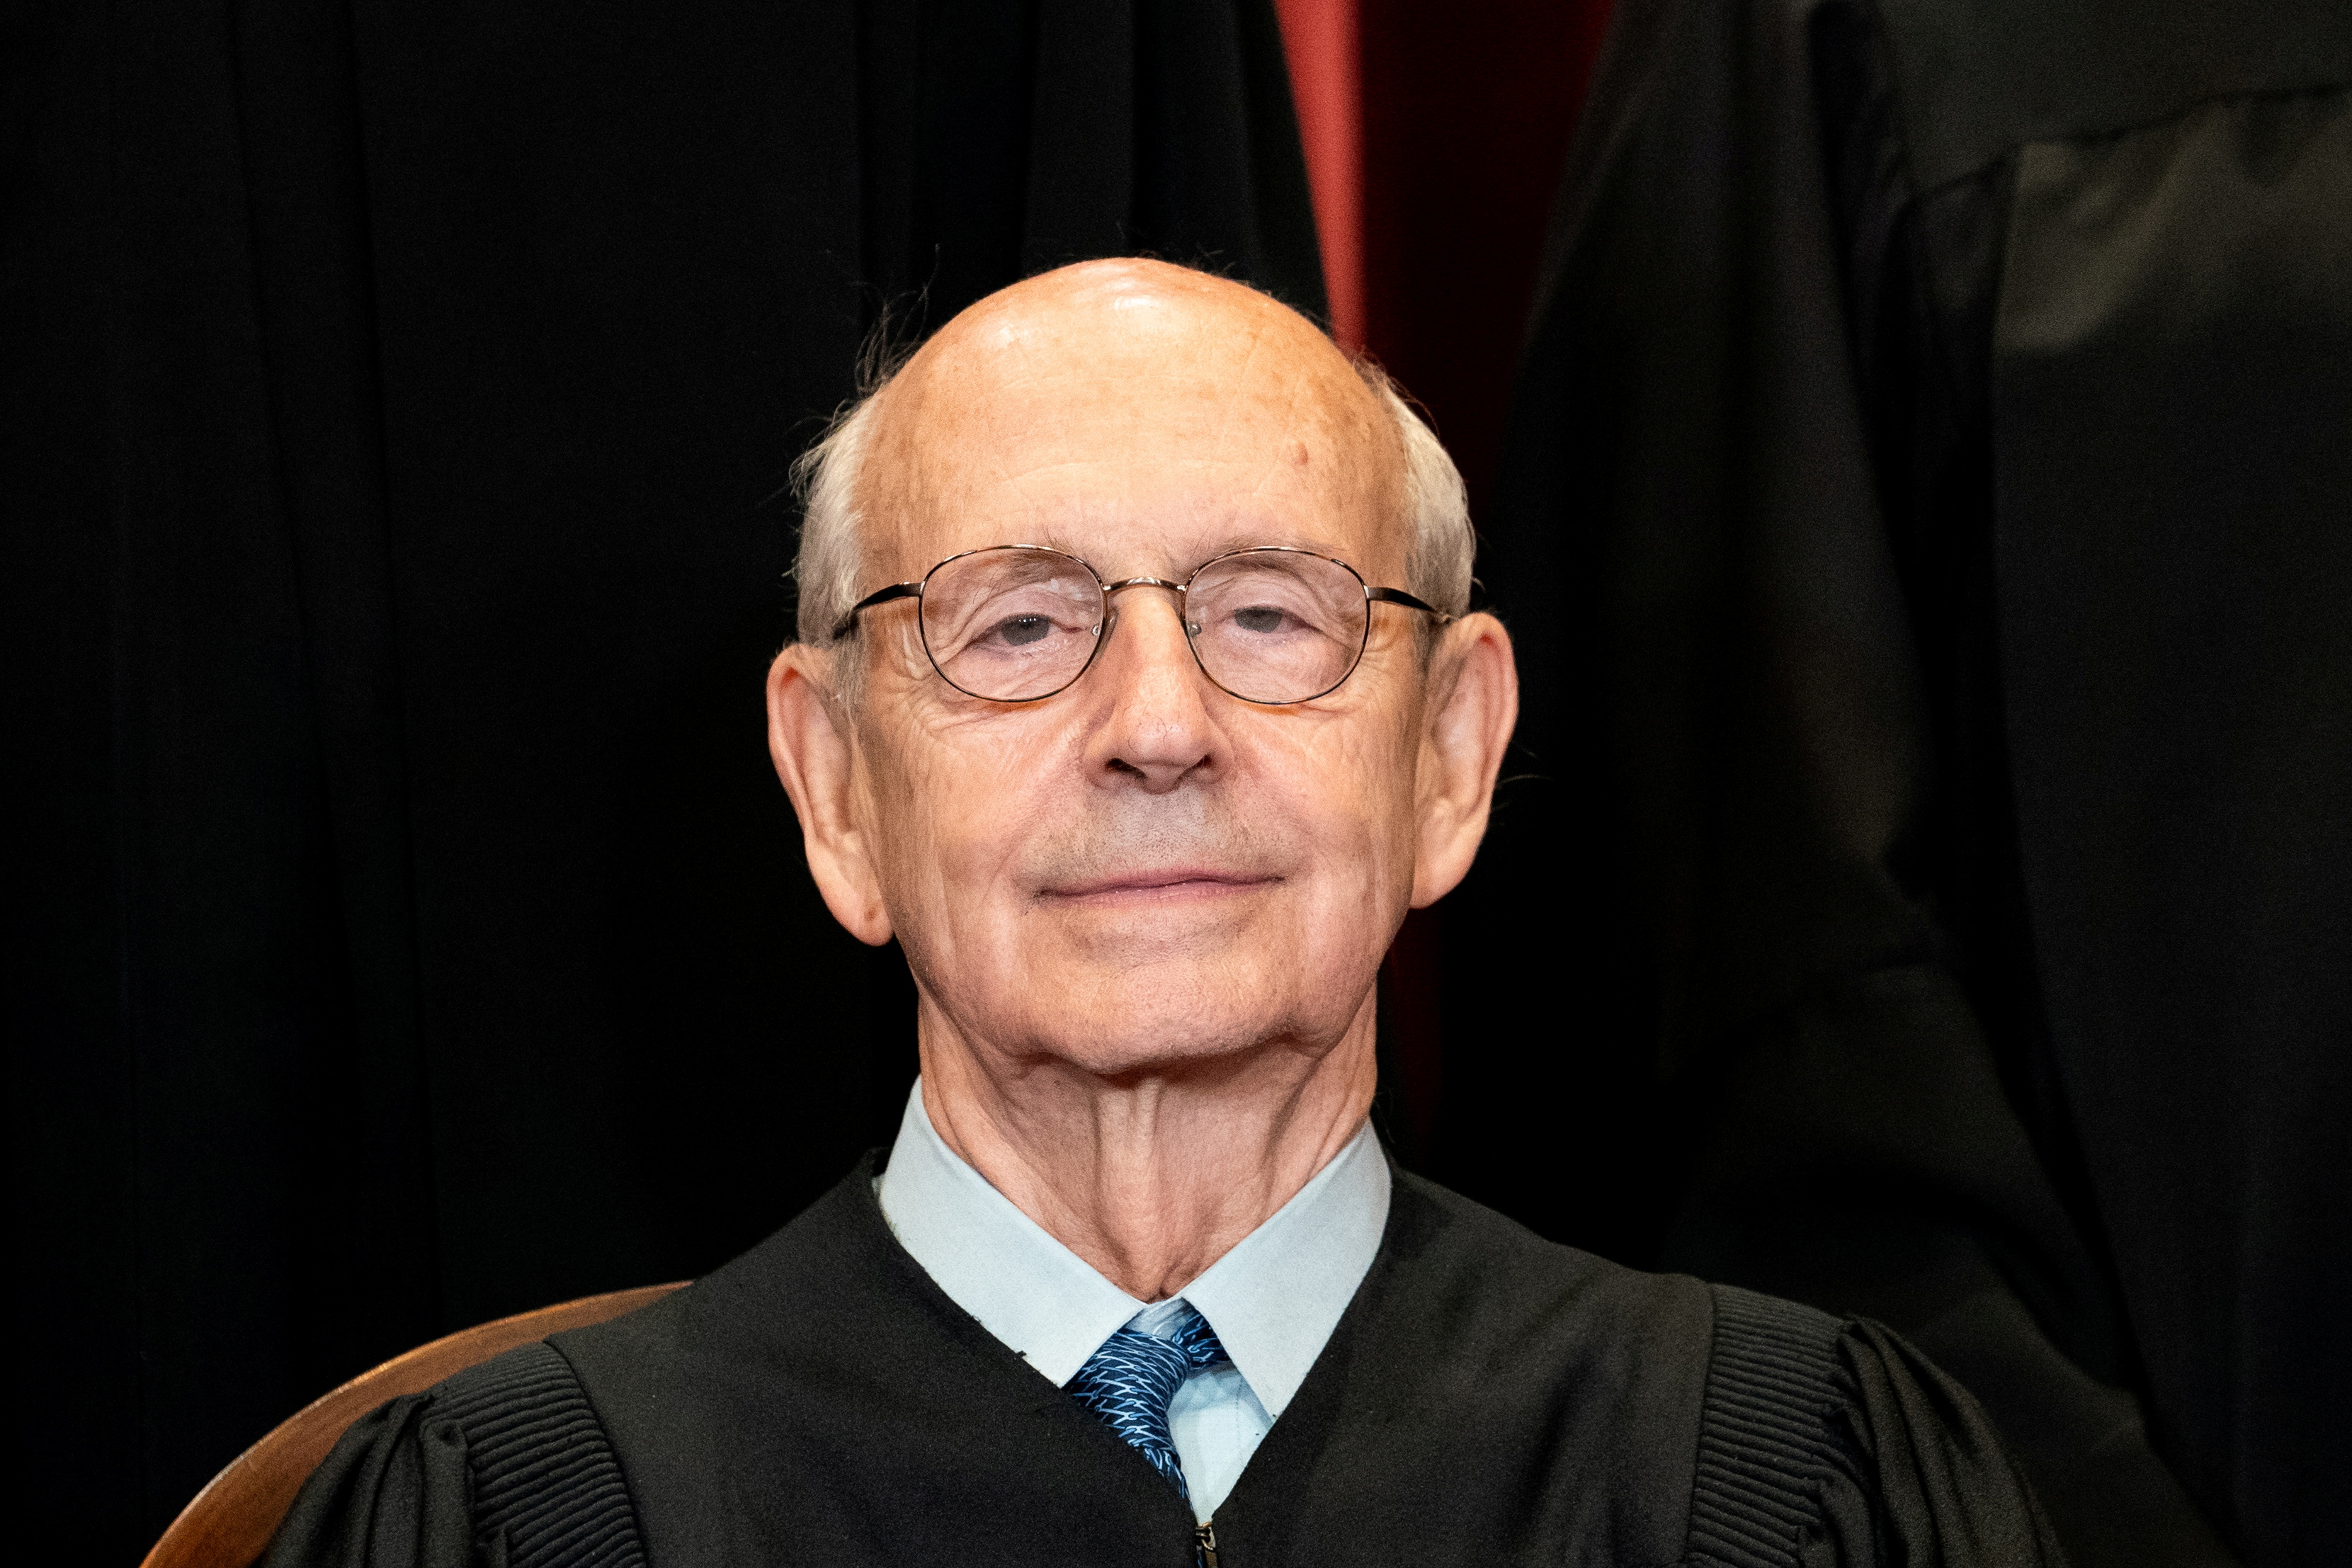 Associate Justice Stephen Breyer poses during a group photo of the Justices at the Supreme Court in Washington